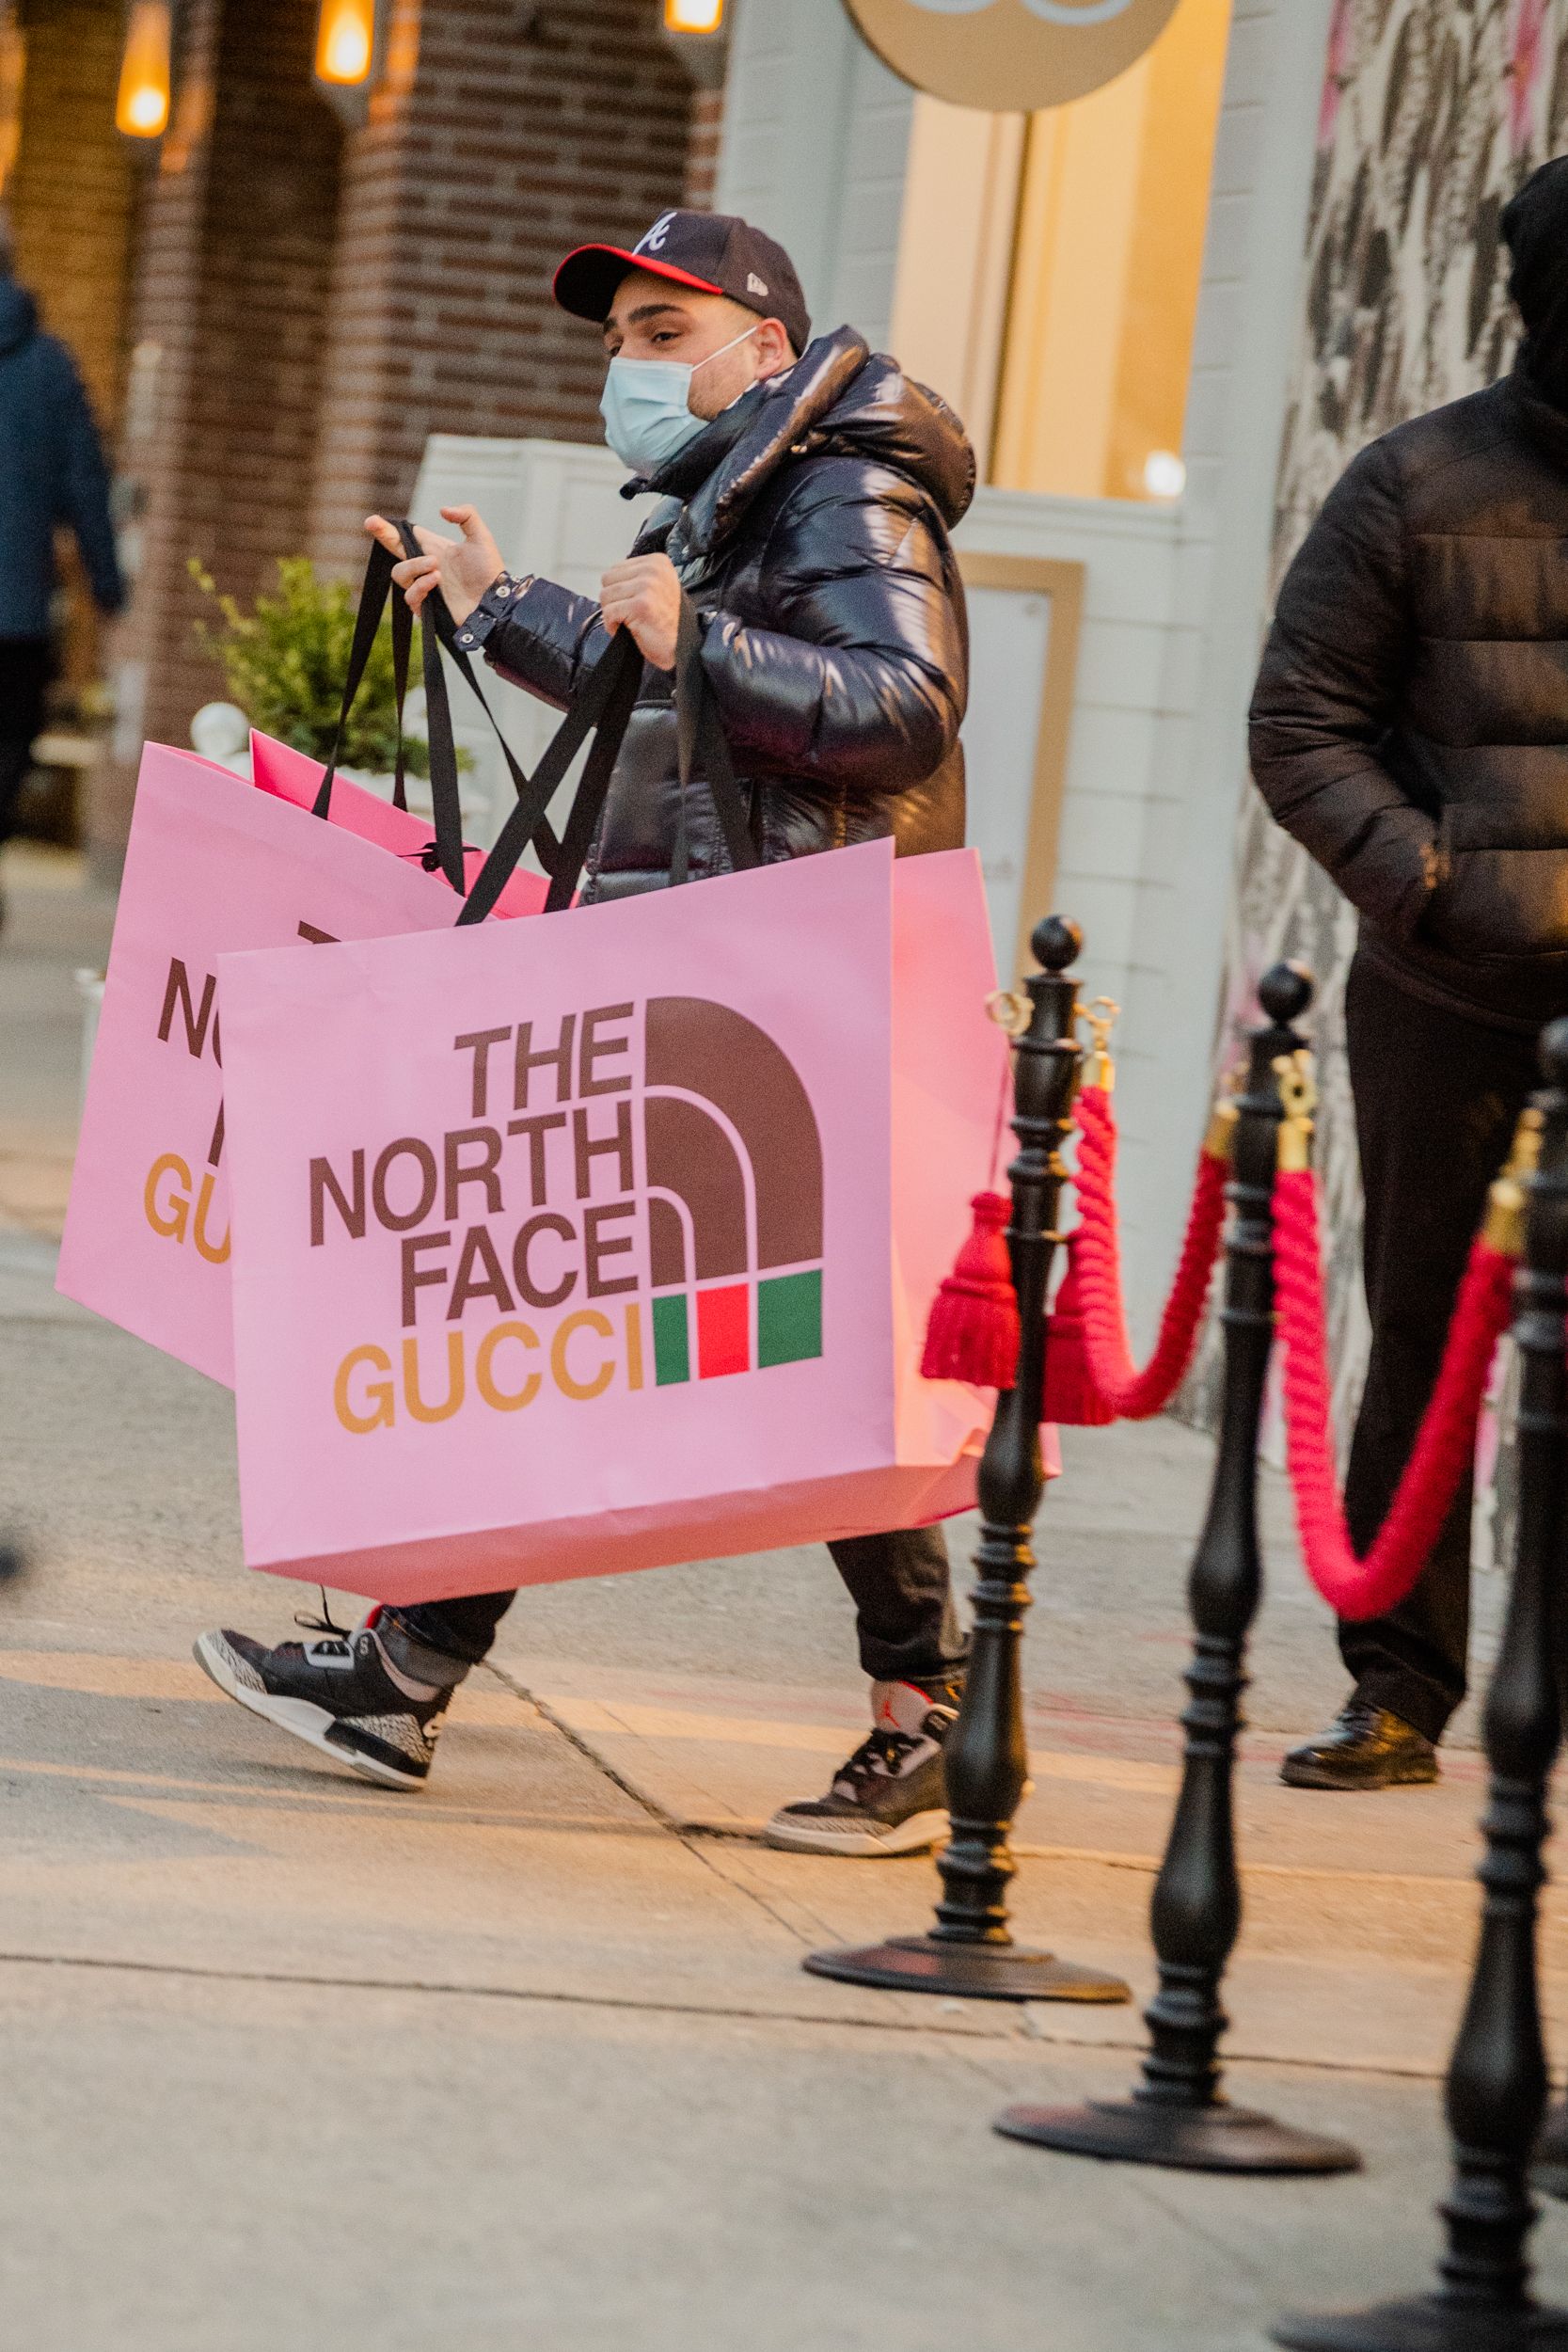 The North Face x Gucci Collection